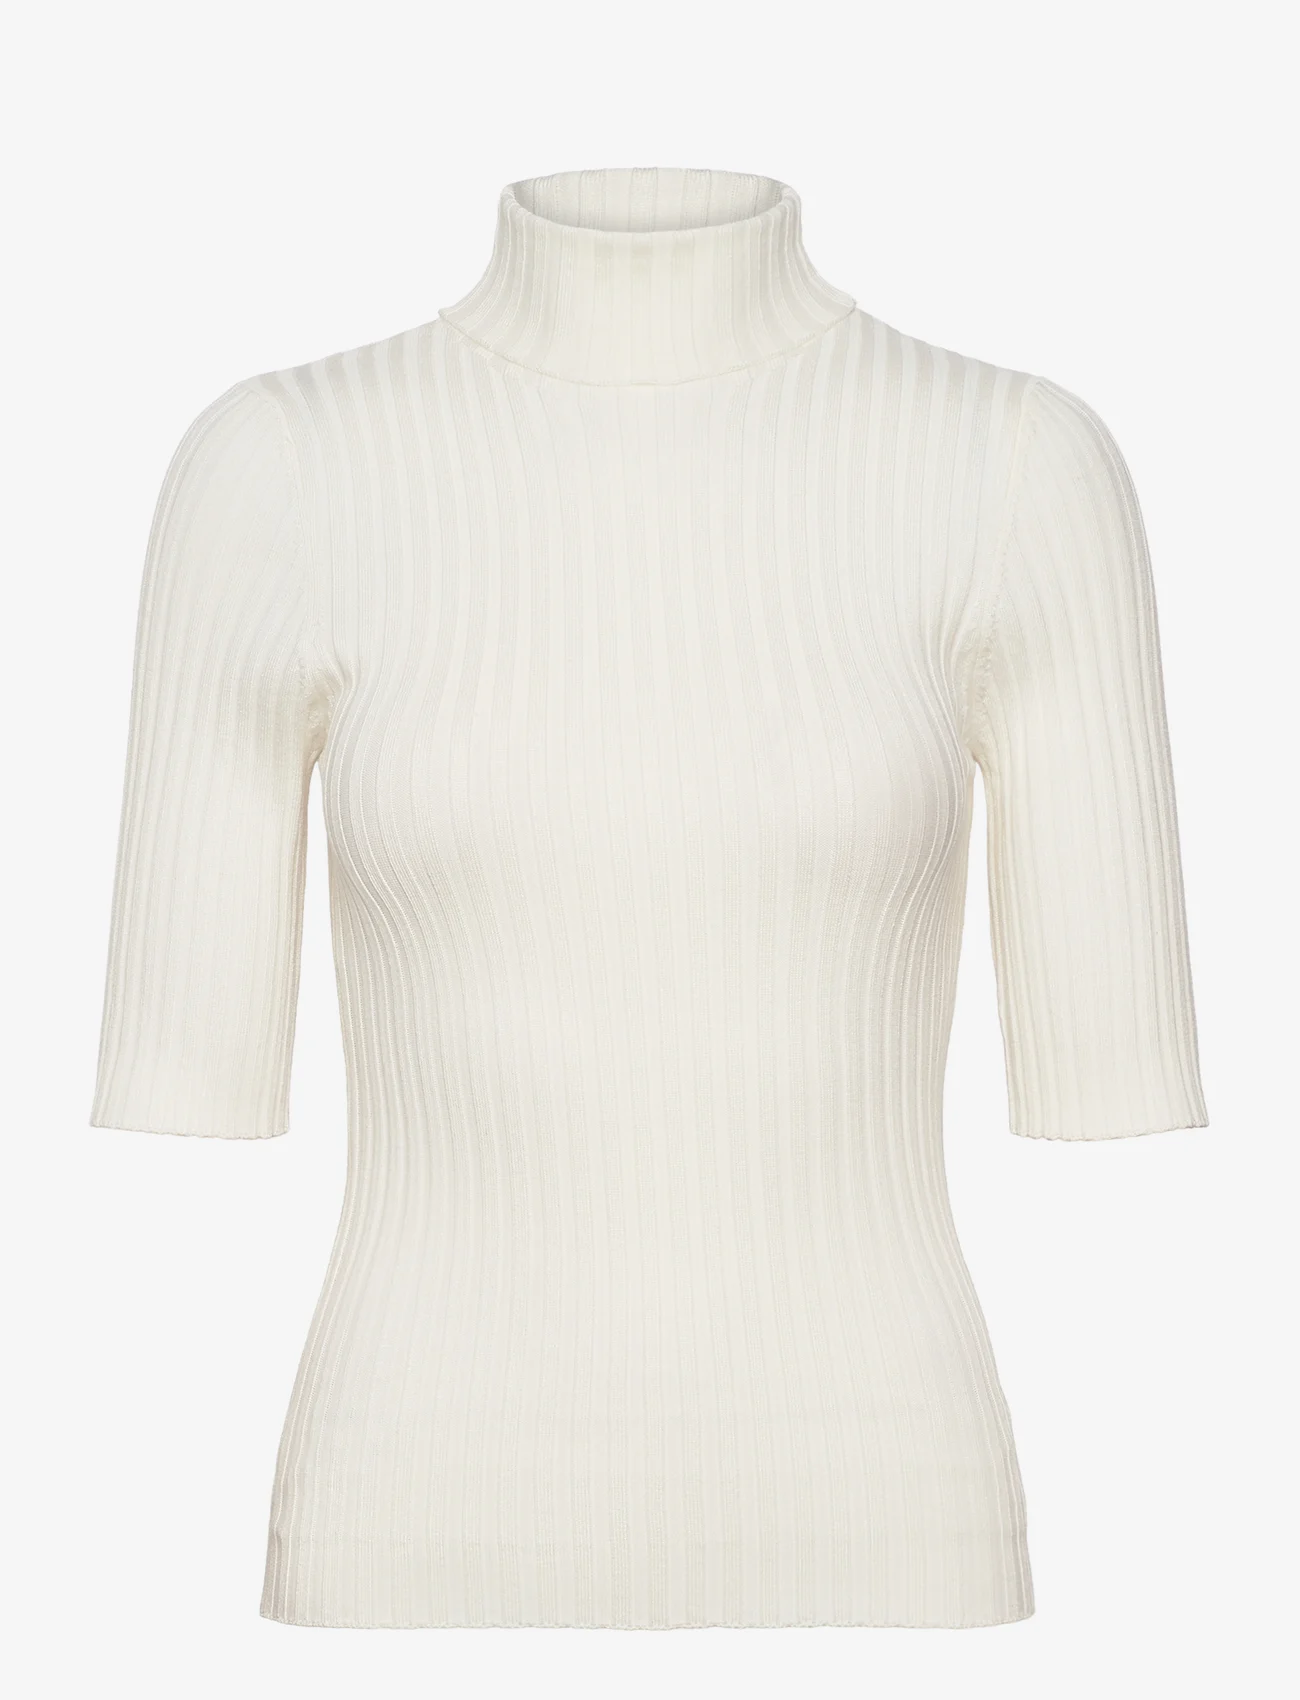 NORR - Franco knit tee - pullover - off-white - 0